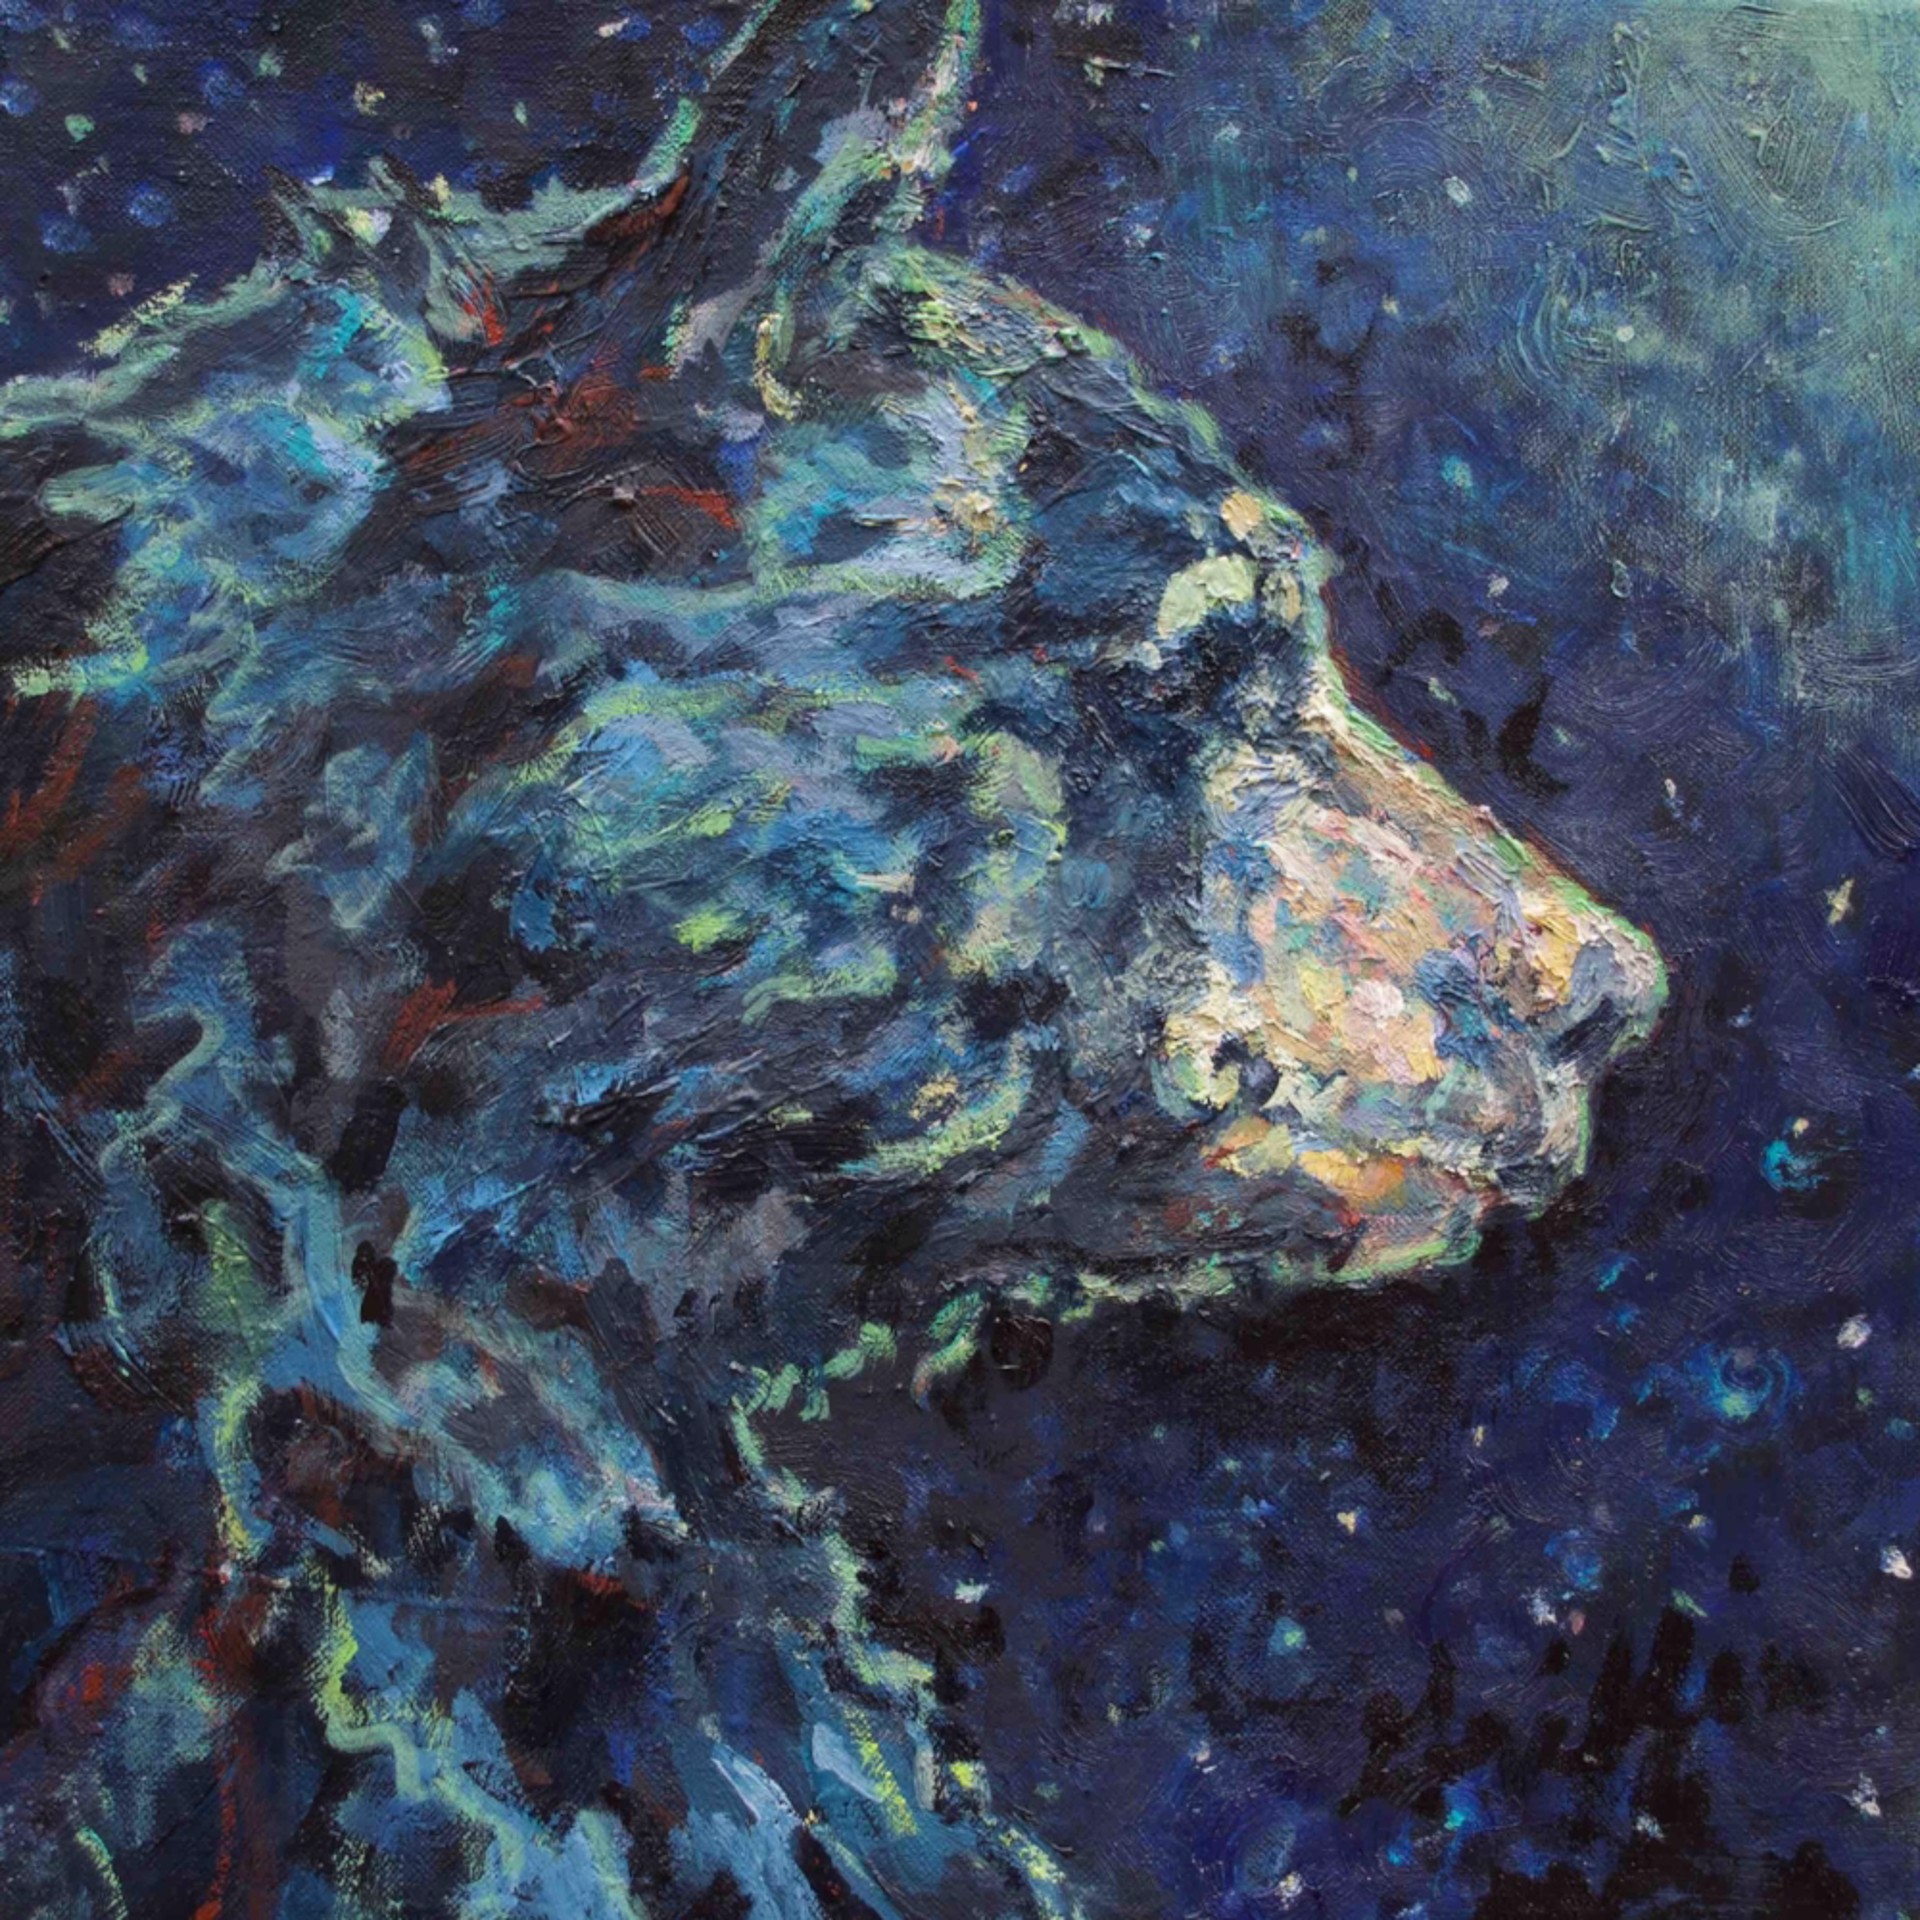 Patricia Griffin Black Bear in Blues In Oil On Linen, A Contemporary Fine Art Painting and Modern Wildlife Art Piece Available At Gallery Wild